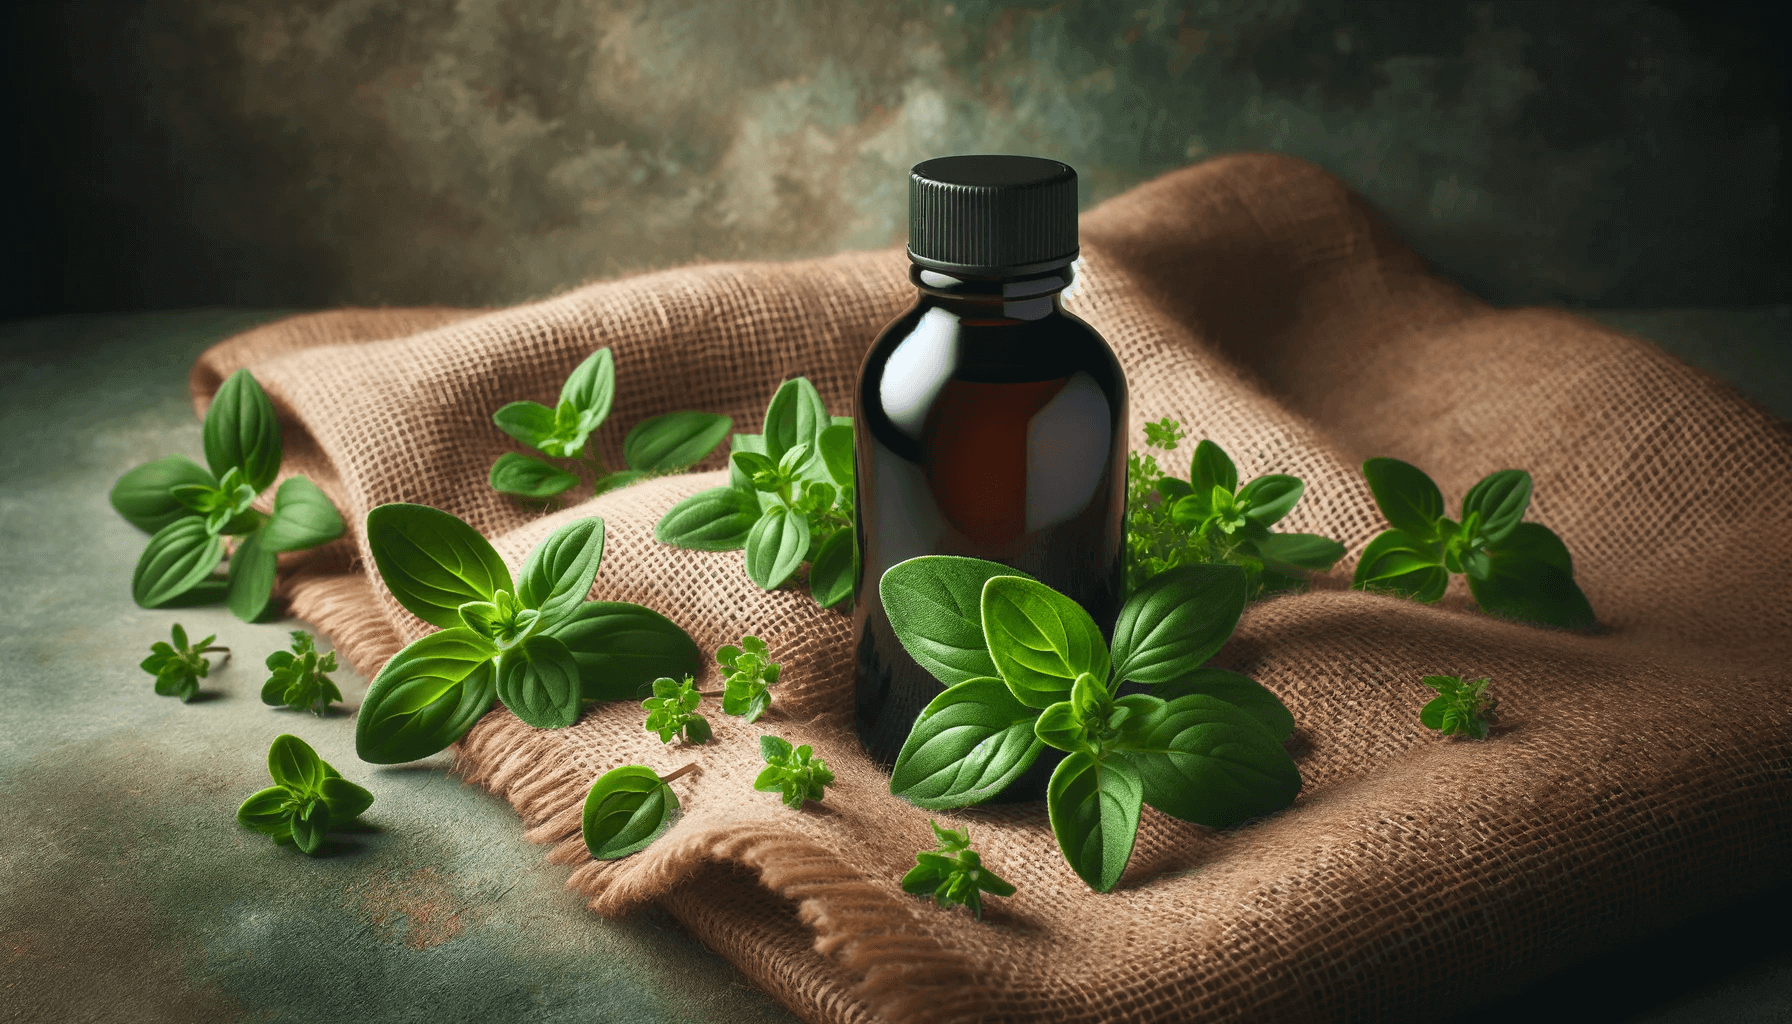 A dark brown bottle with a black cap positioned amongst vibrant green oregano leaves